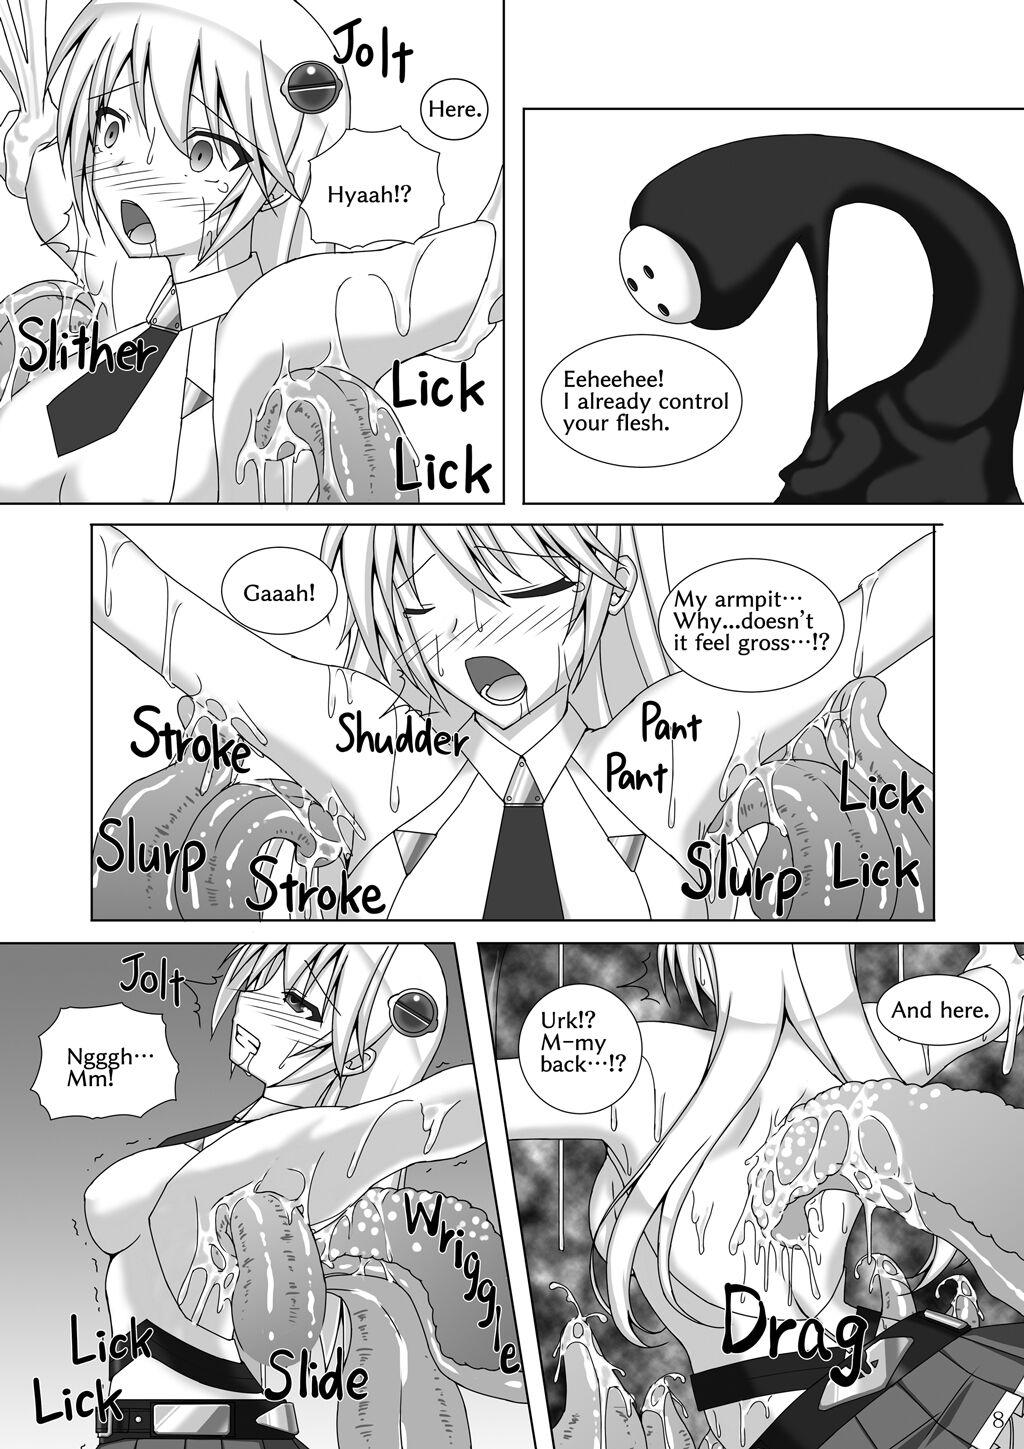 Licking Pussy Noel Doesn't hate Arakune Anymore! 3 - Blazblue Tight - Page 9